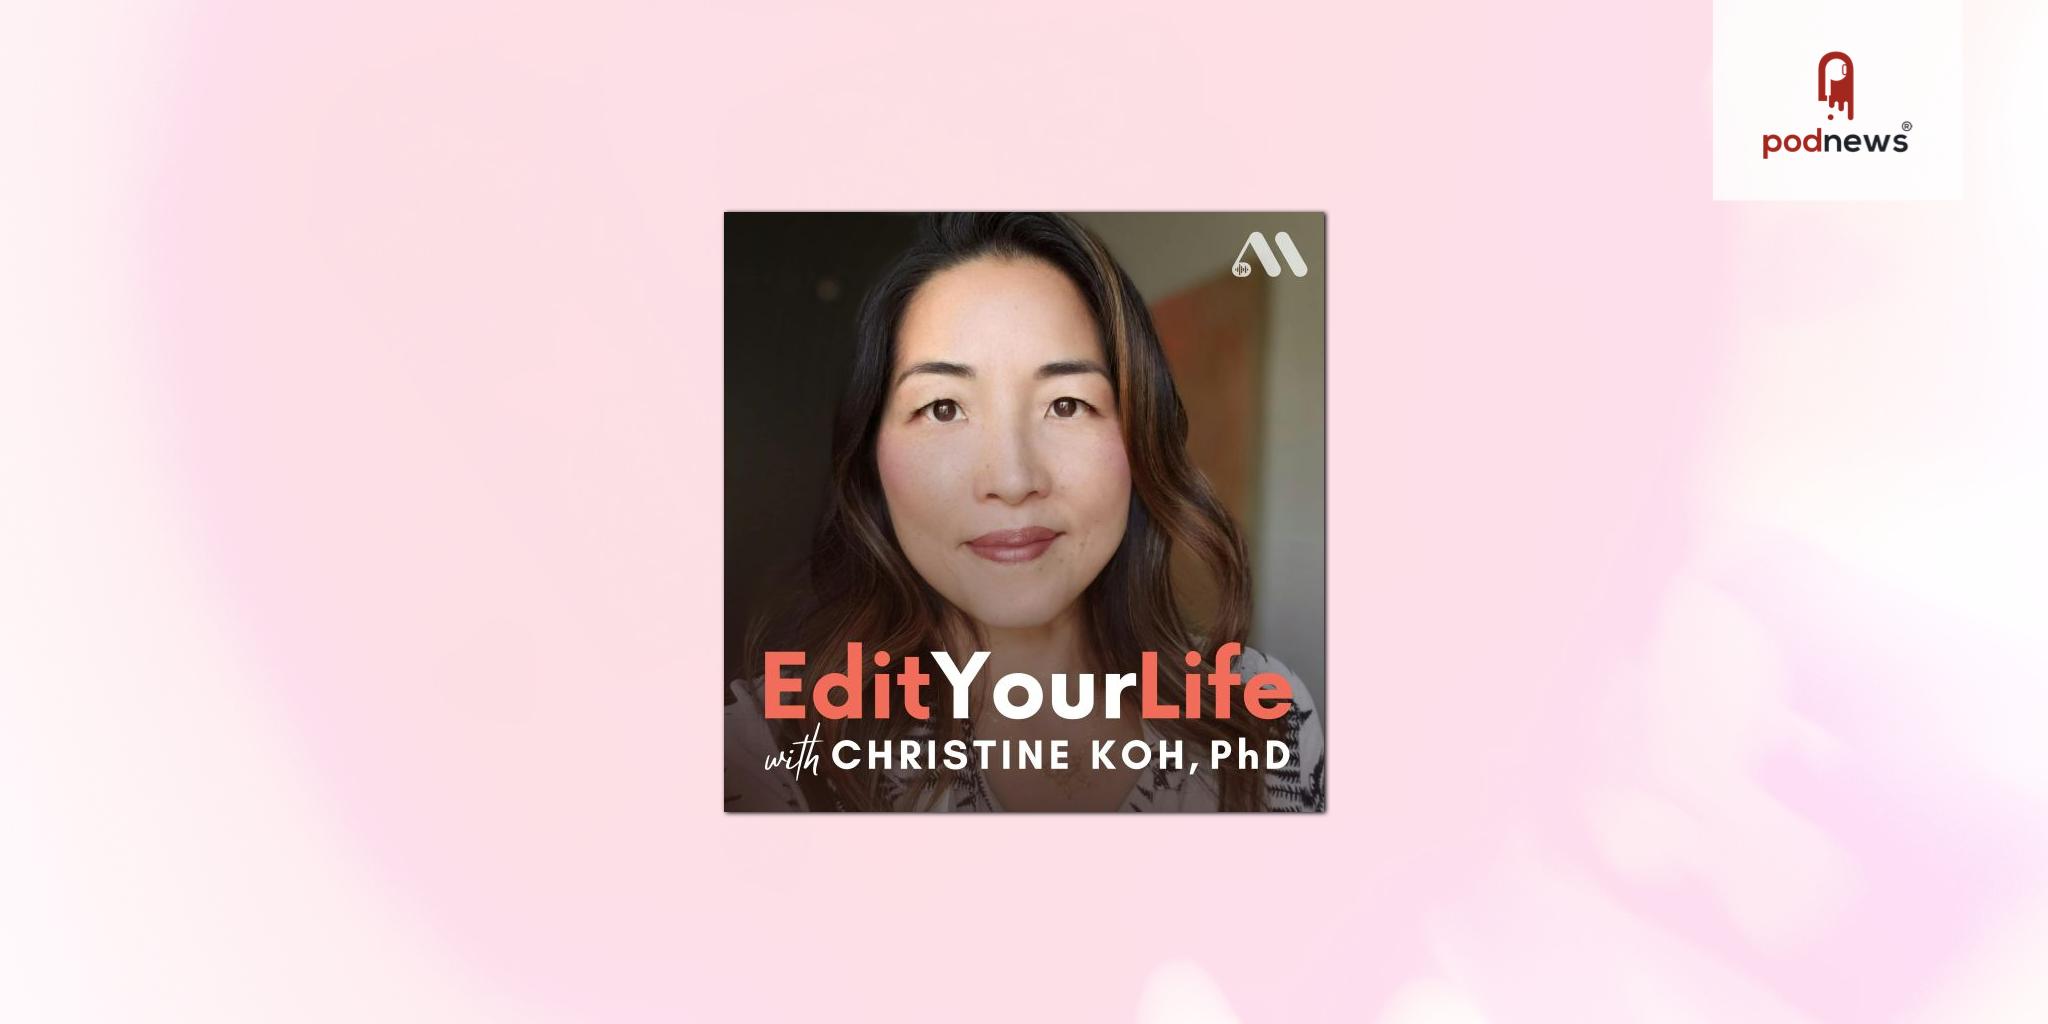 Edit Your Life Joins Adalyst Media’s Podcast Slate